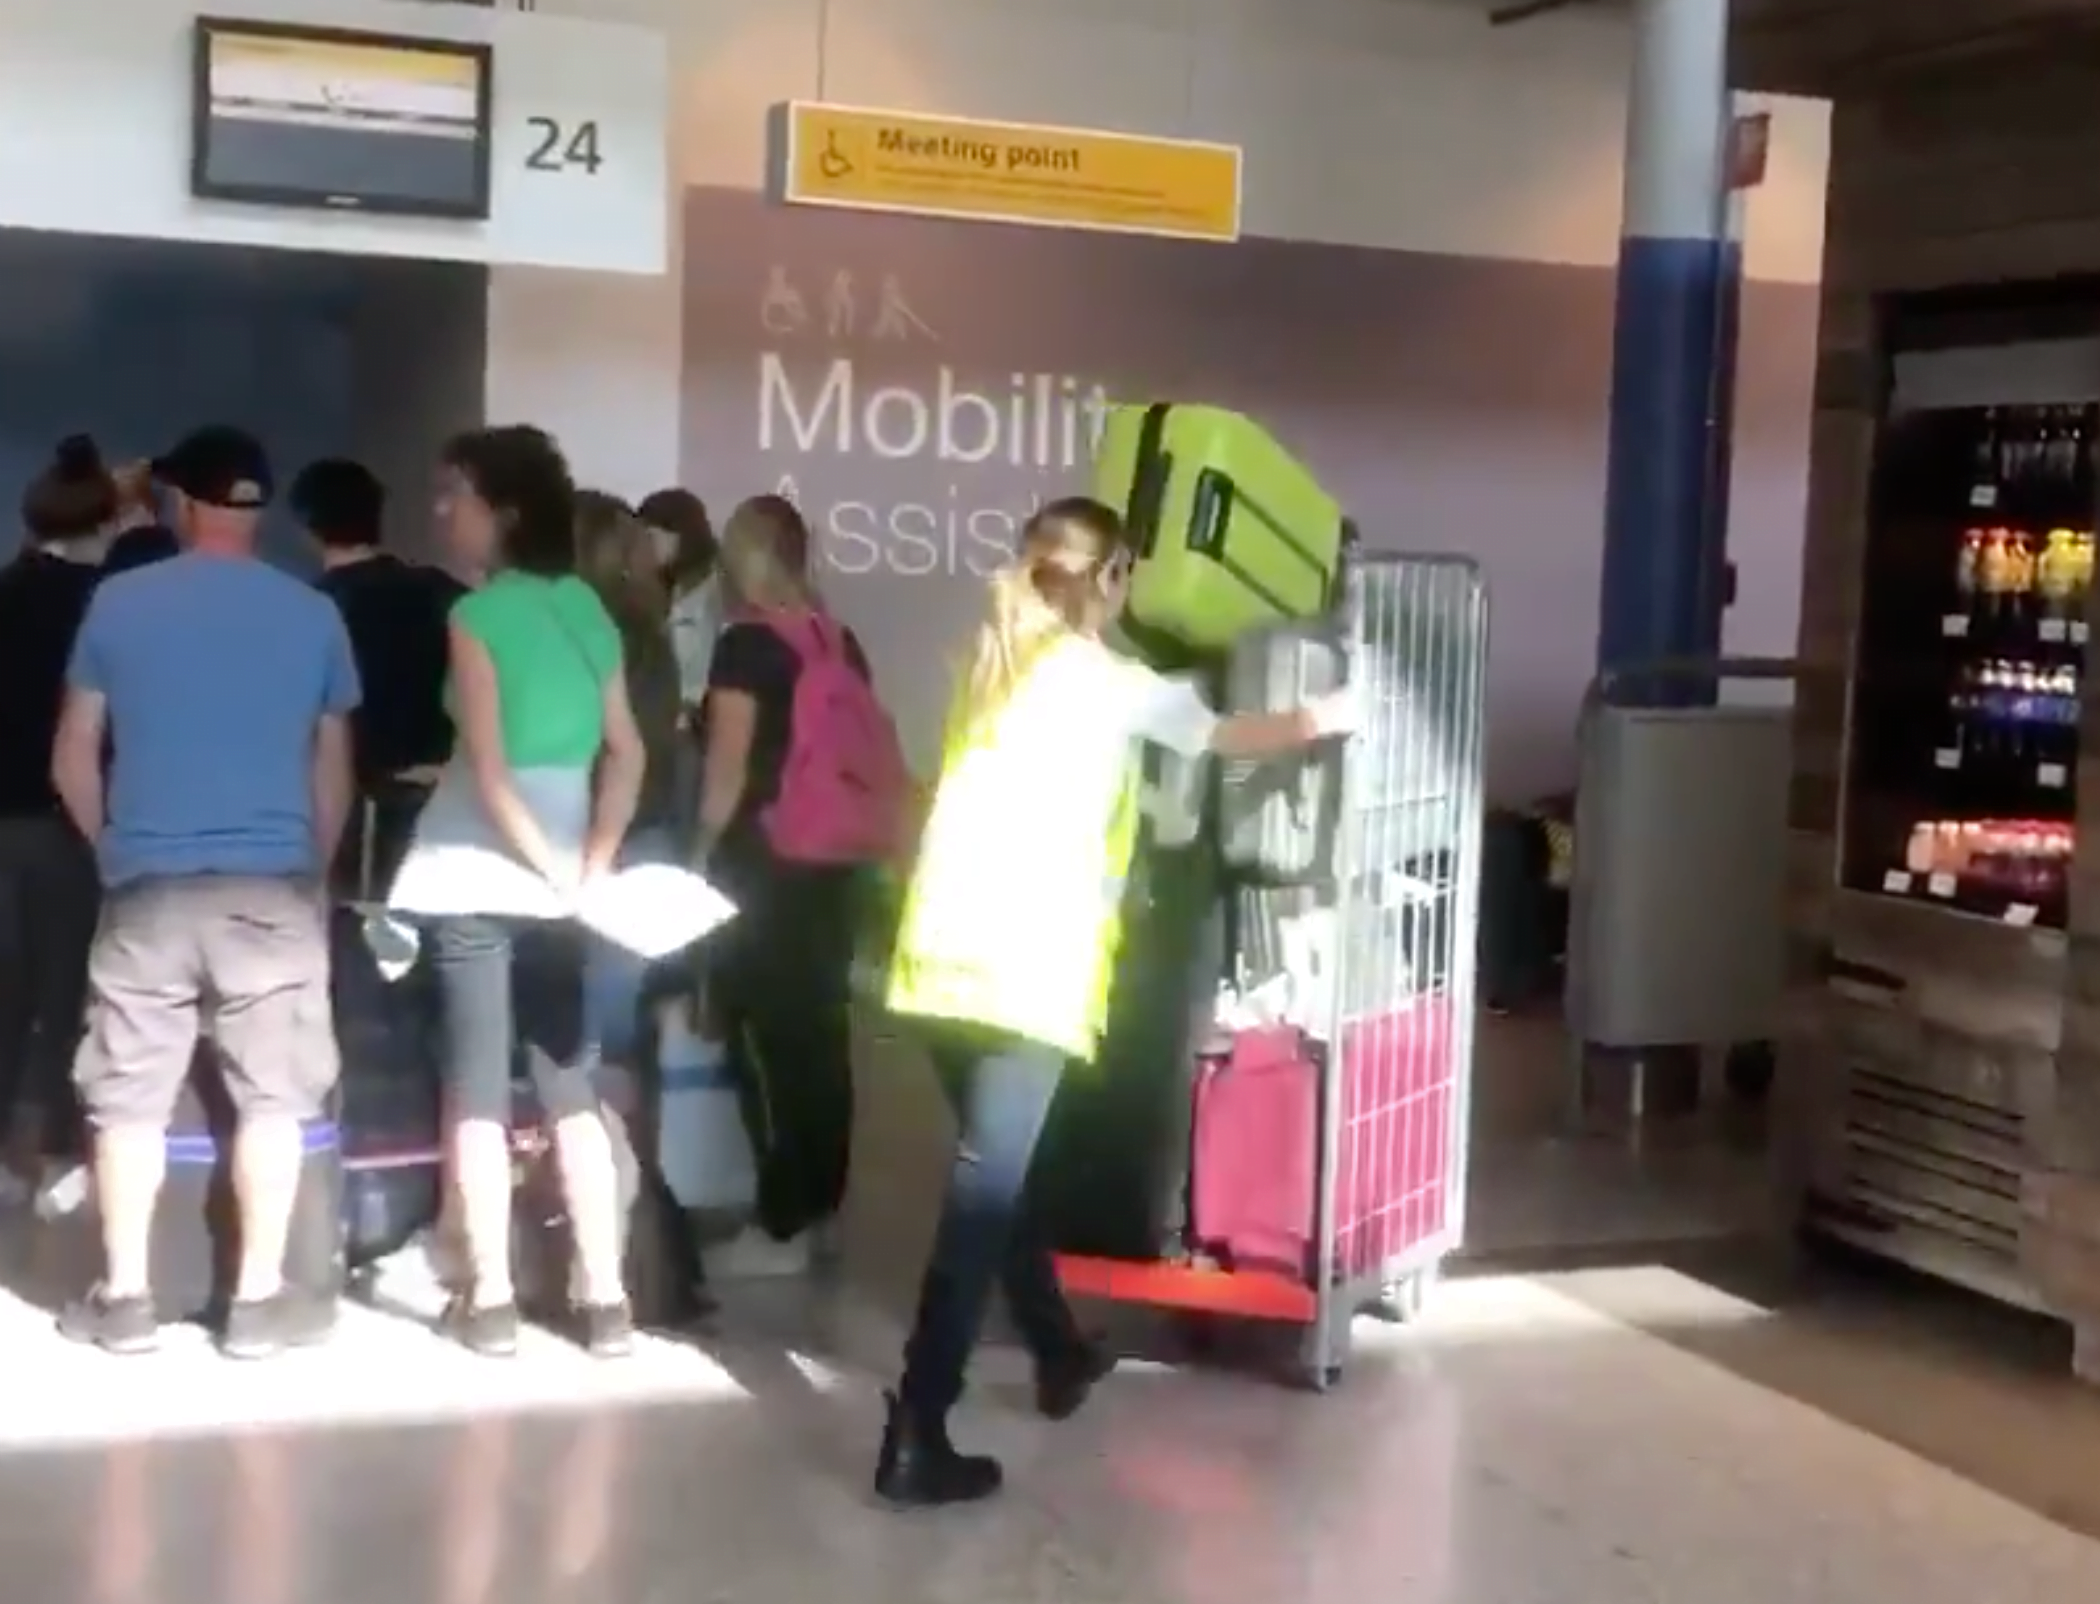 Another failure in baggage handling at Eindhoven Airport